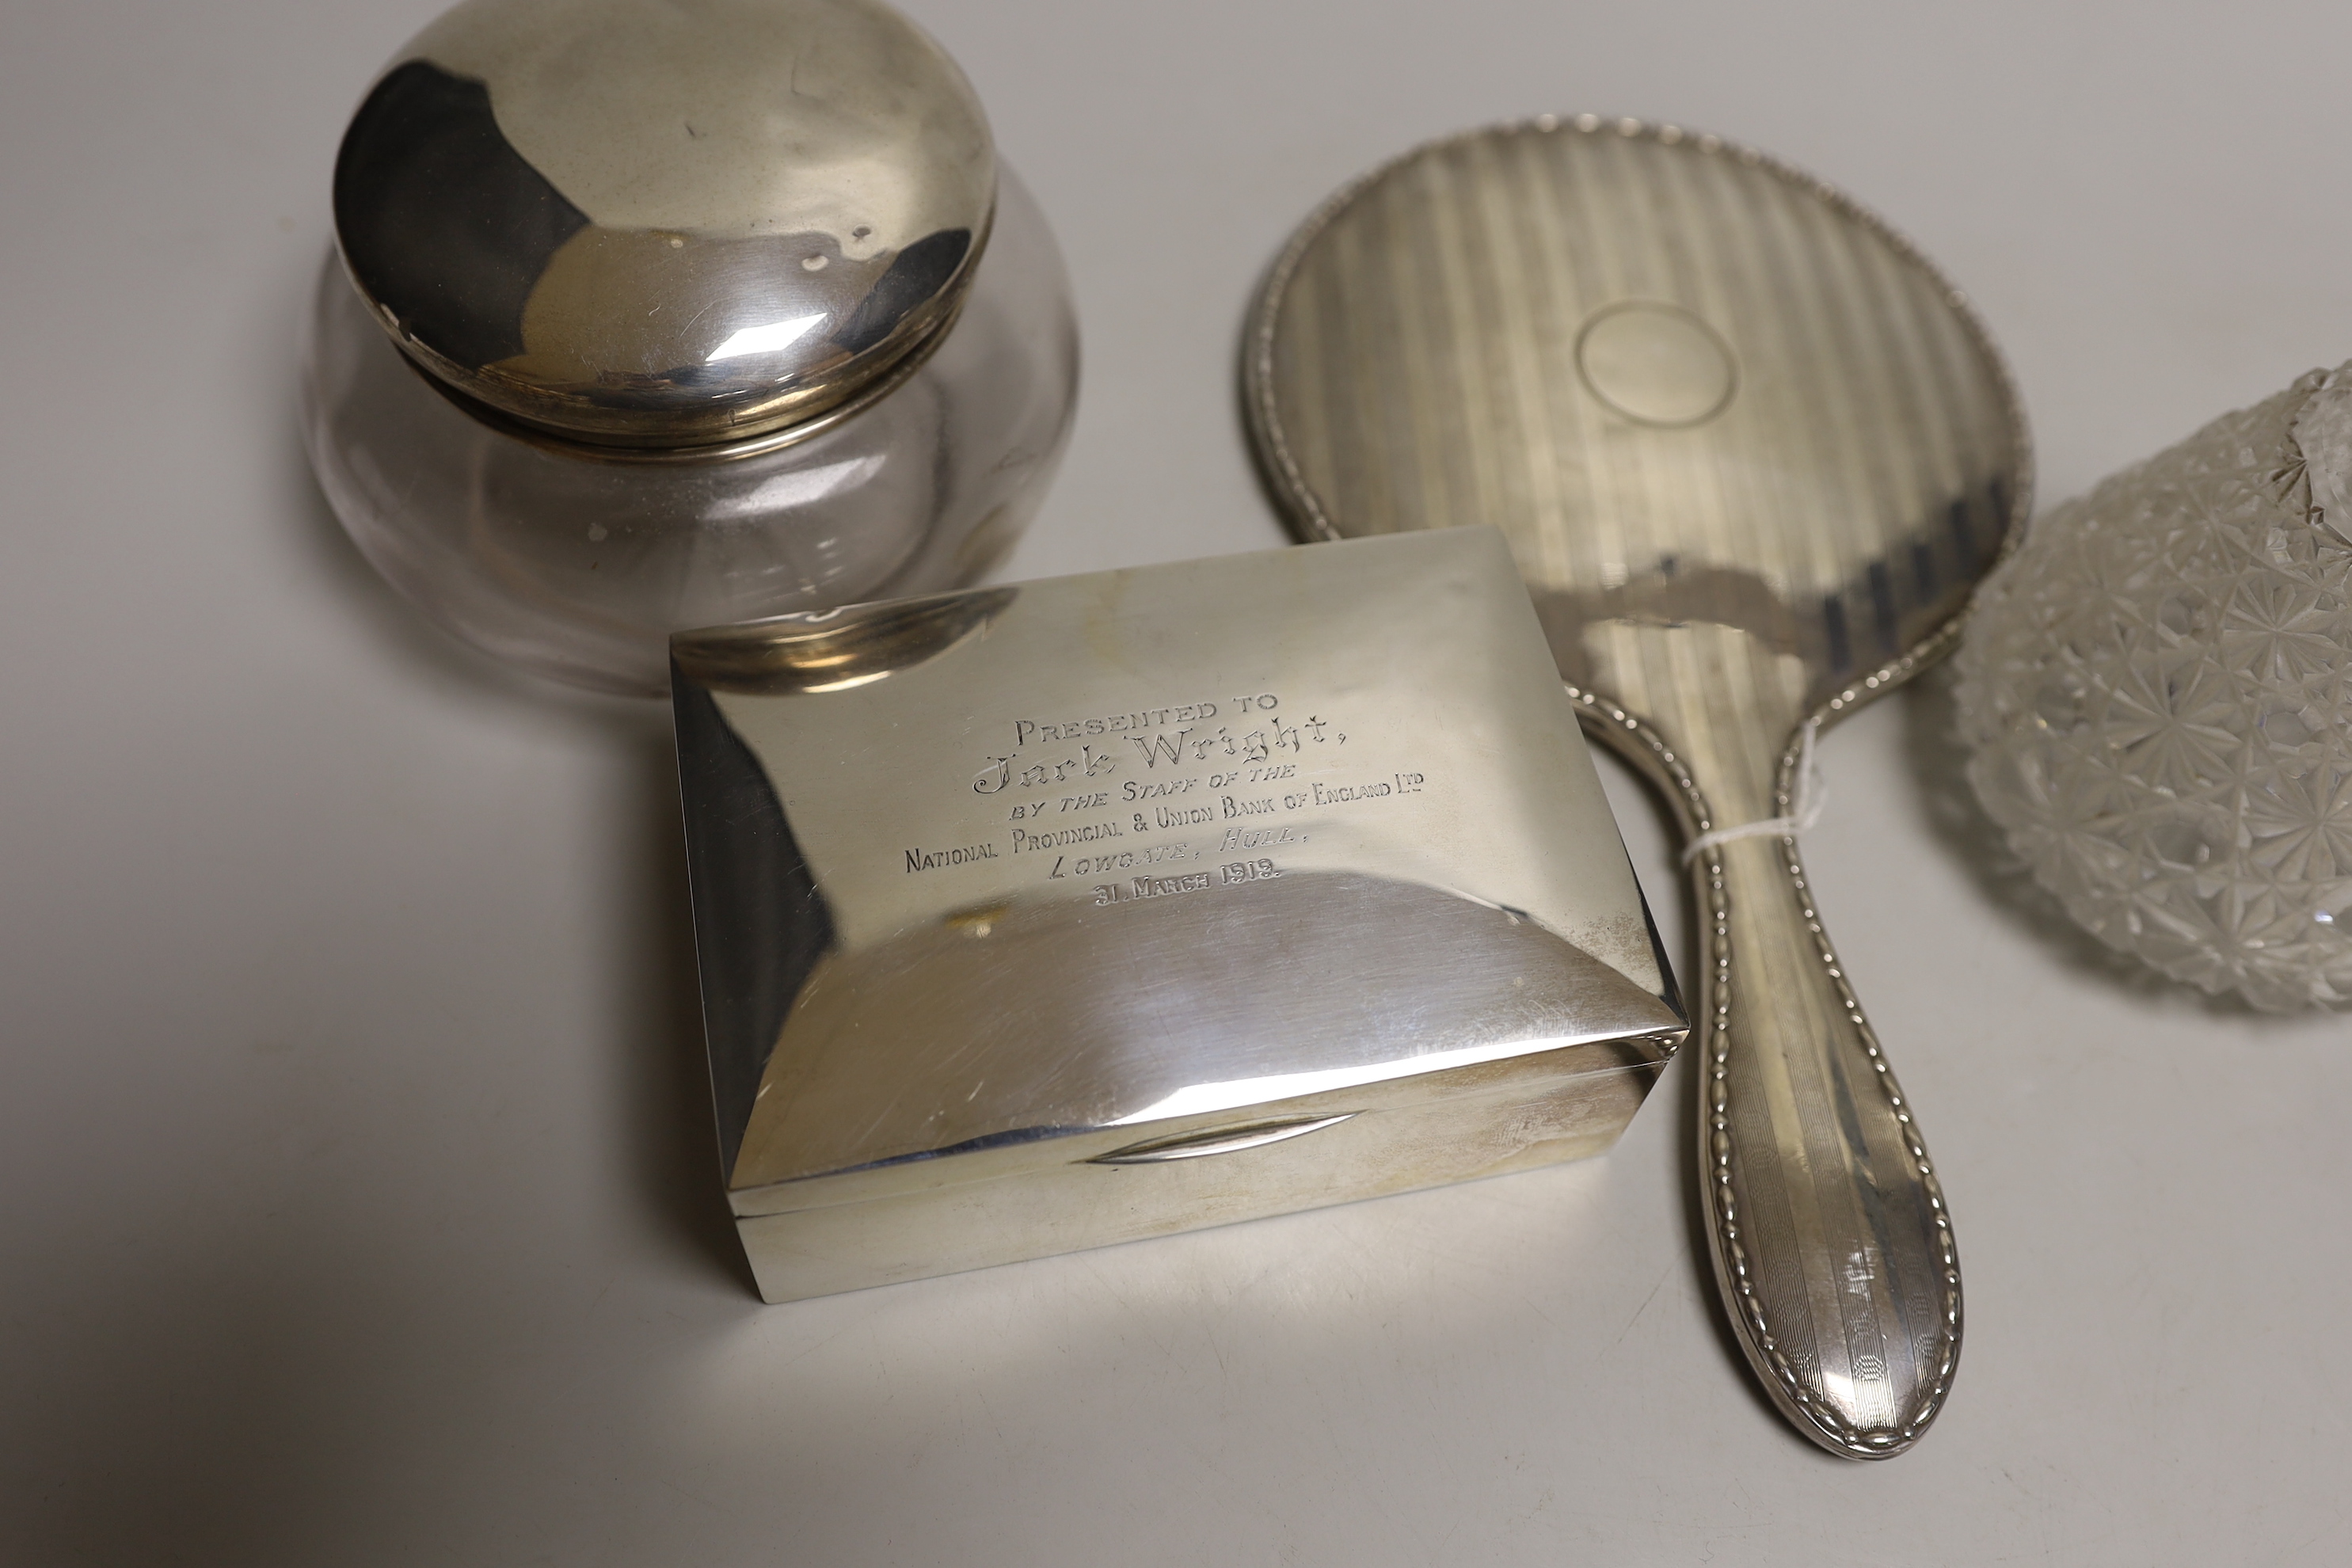 A George V silver backed hand mirror, a silver mounted cigarette box, a silver topped powder bowl and a silver topped scent bottle.